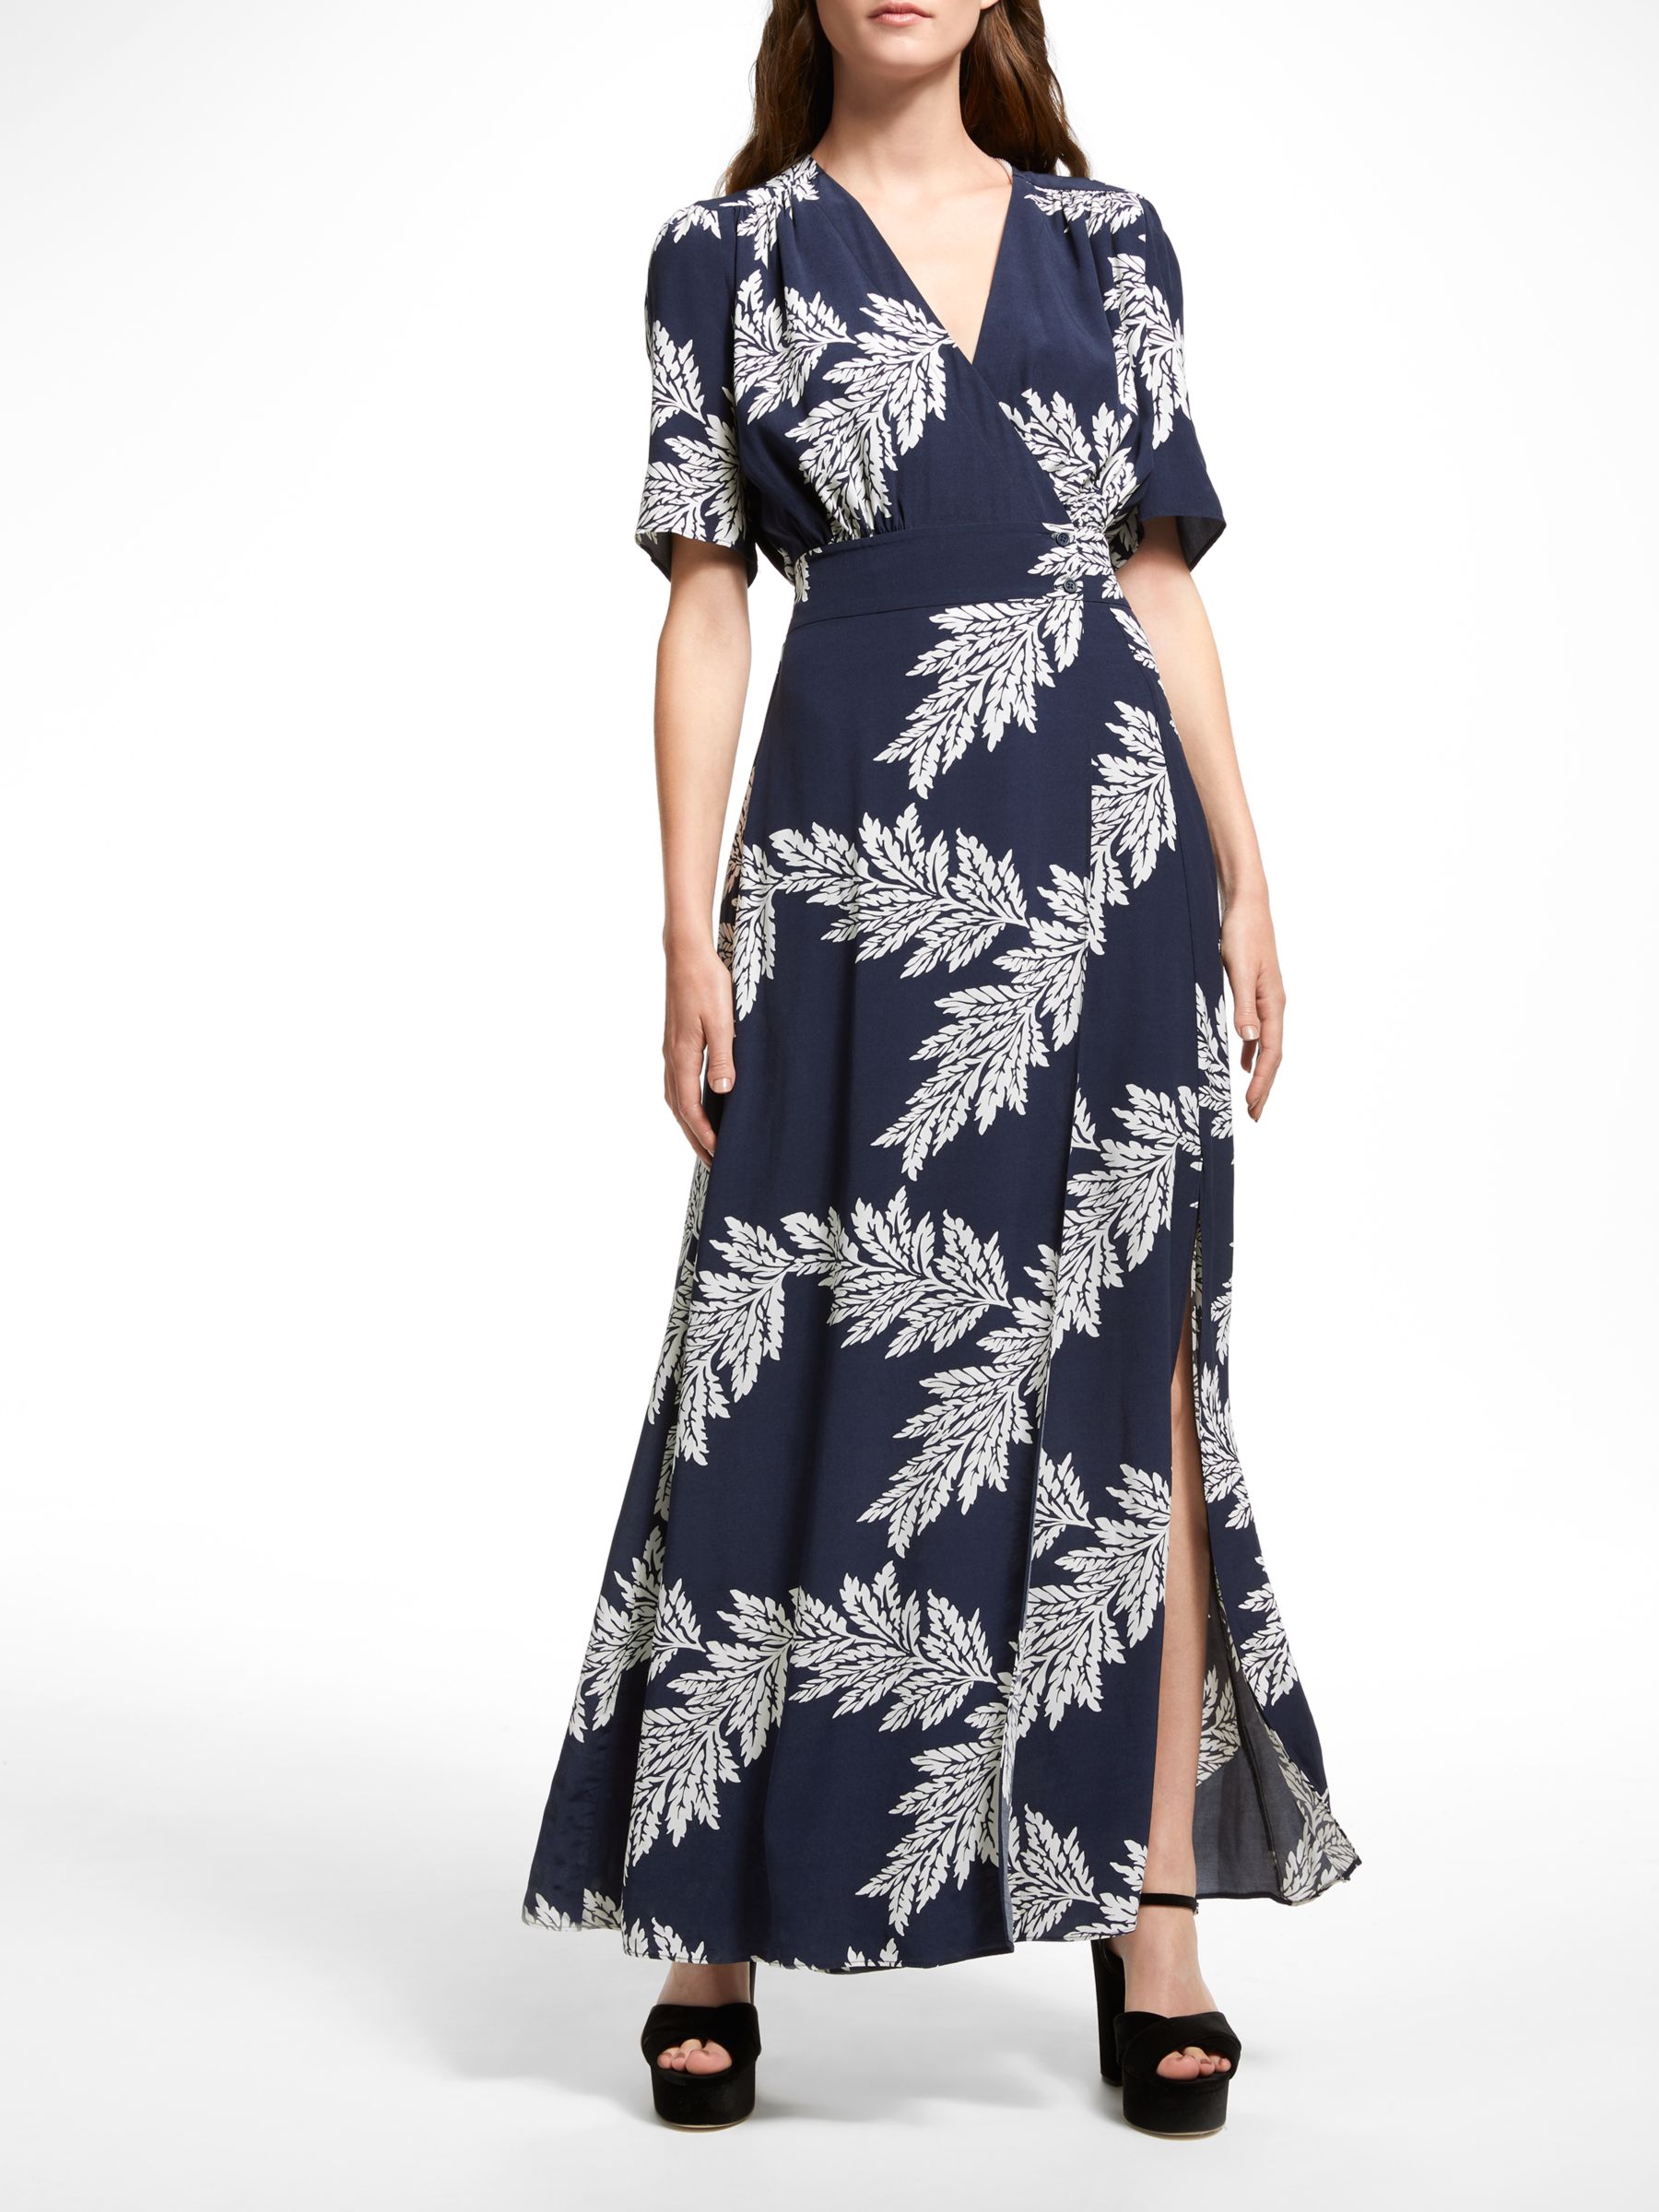 Somerset by Alice Temperley Palm Print Maxi Dress, Navy at John Lewis ...